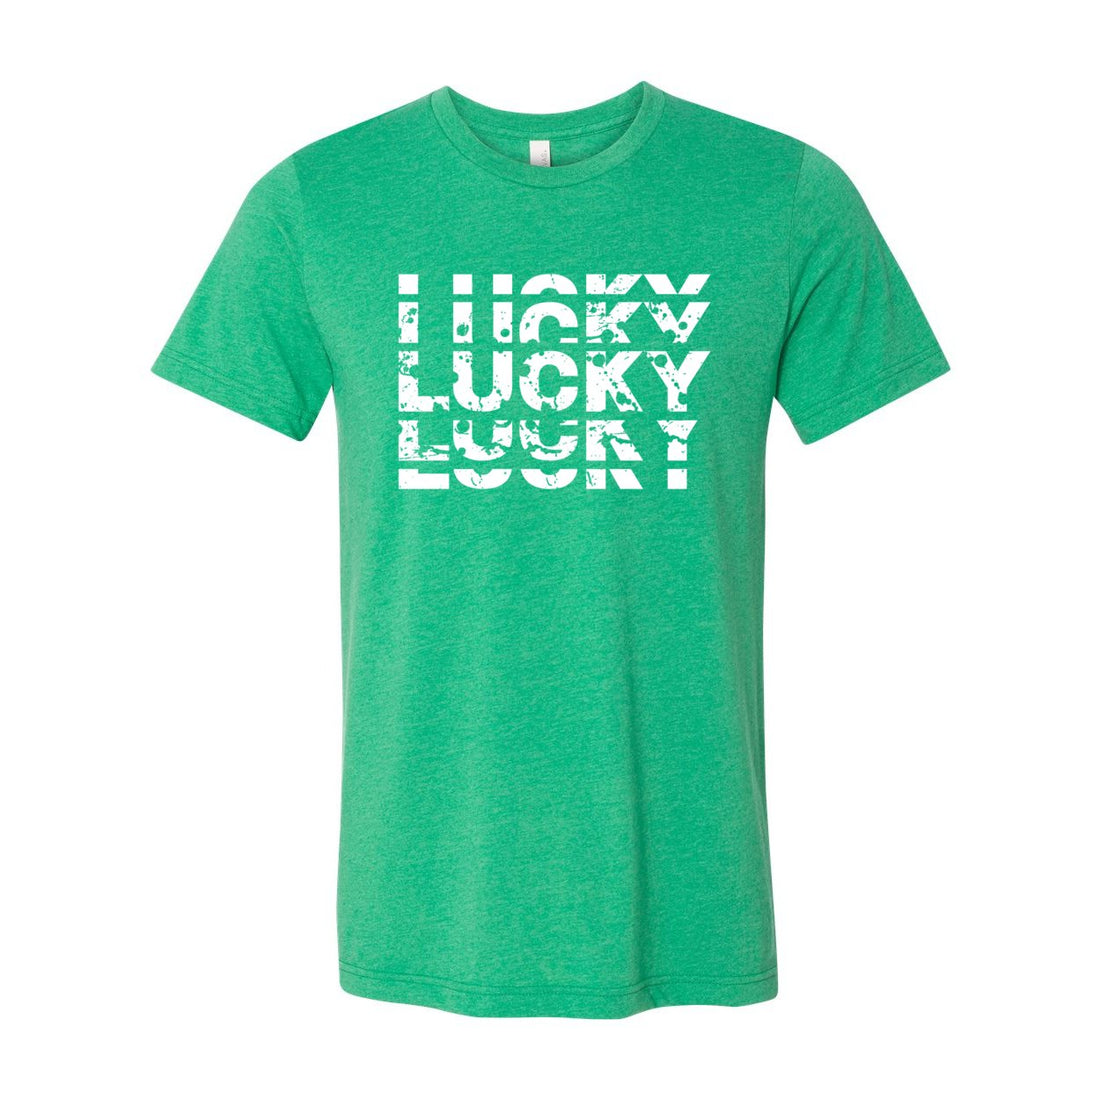 LUCKY Sleeve Jersey Tee - T-Shirts - Positively Sassy - LUCKY Sleeve Jersey Tee